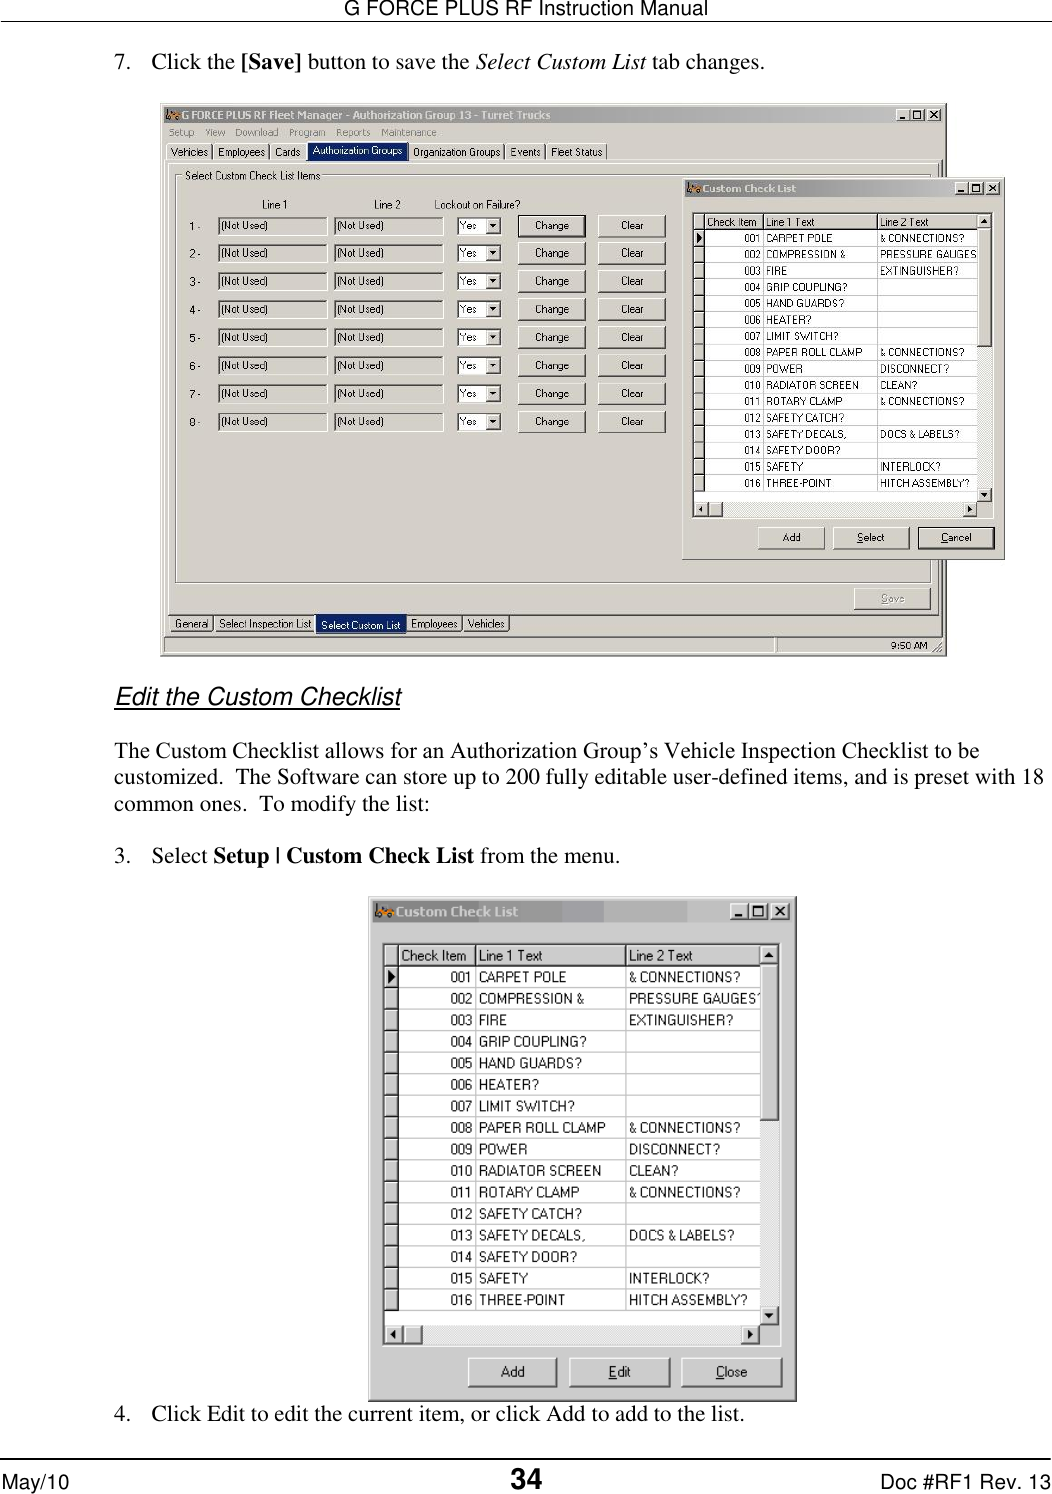 G FORCE PLUS RF Instruction Manual   May/10 34 Doc #RF1 Rev. 13 7. Click the [Save] button to save the Select Custom List tab changes.    Edit the Custom Checklist  The Custom Checklist allows for an Authorization Group’s Vehicle Inspection Checklist to be customized.  The Software can store up to 200 fully editable user-defined items, and is preset with 18 common ones.  To modify the list:  3. Select Setup | Custom Check List from the menu.   4. Click Edit to edit the current item, or click Add to add to the list. 